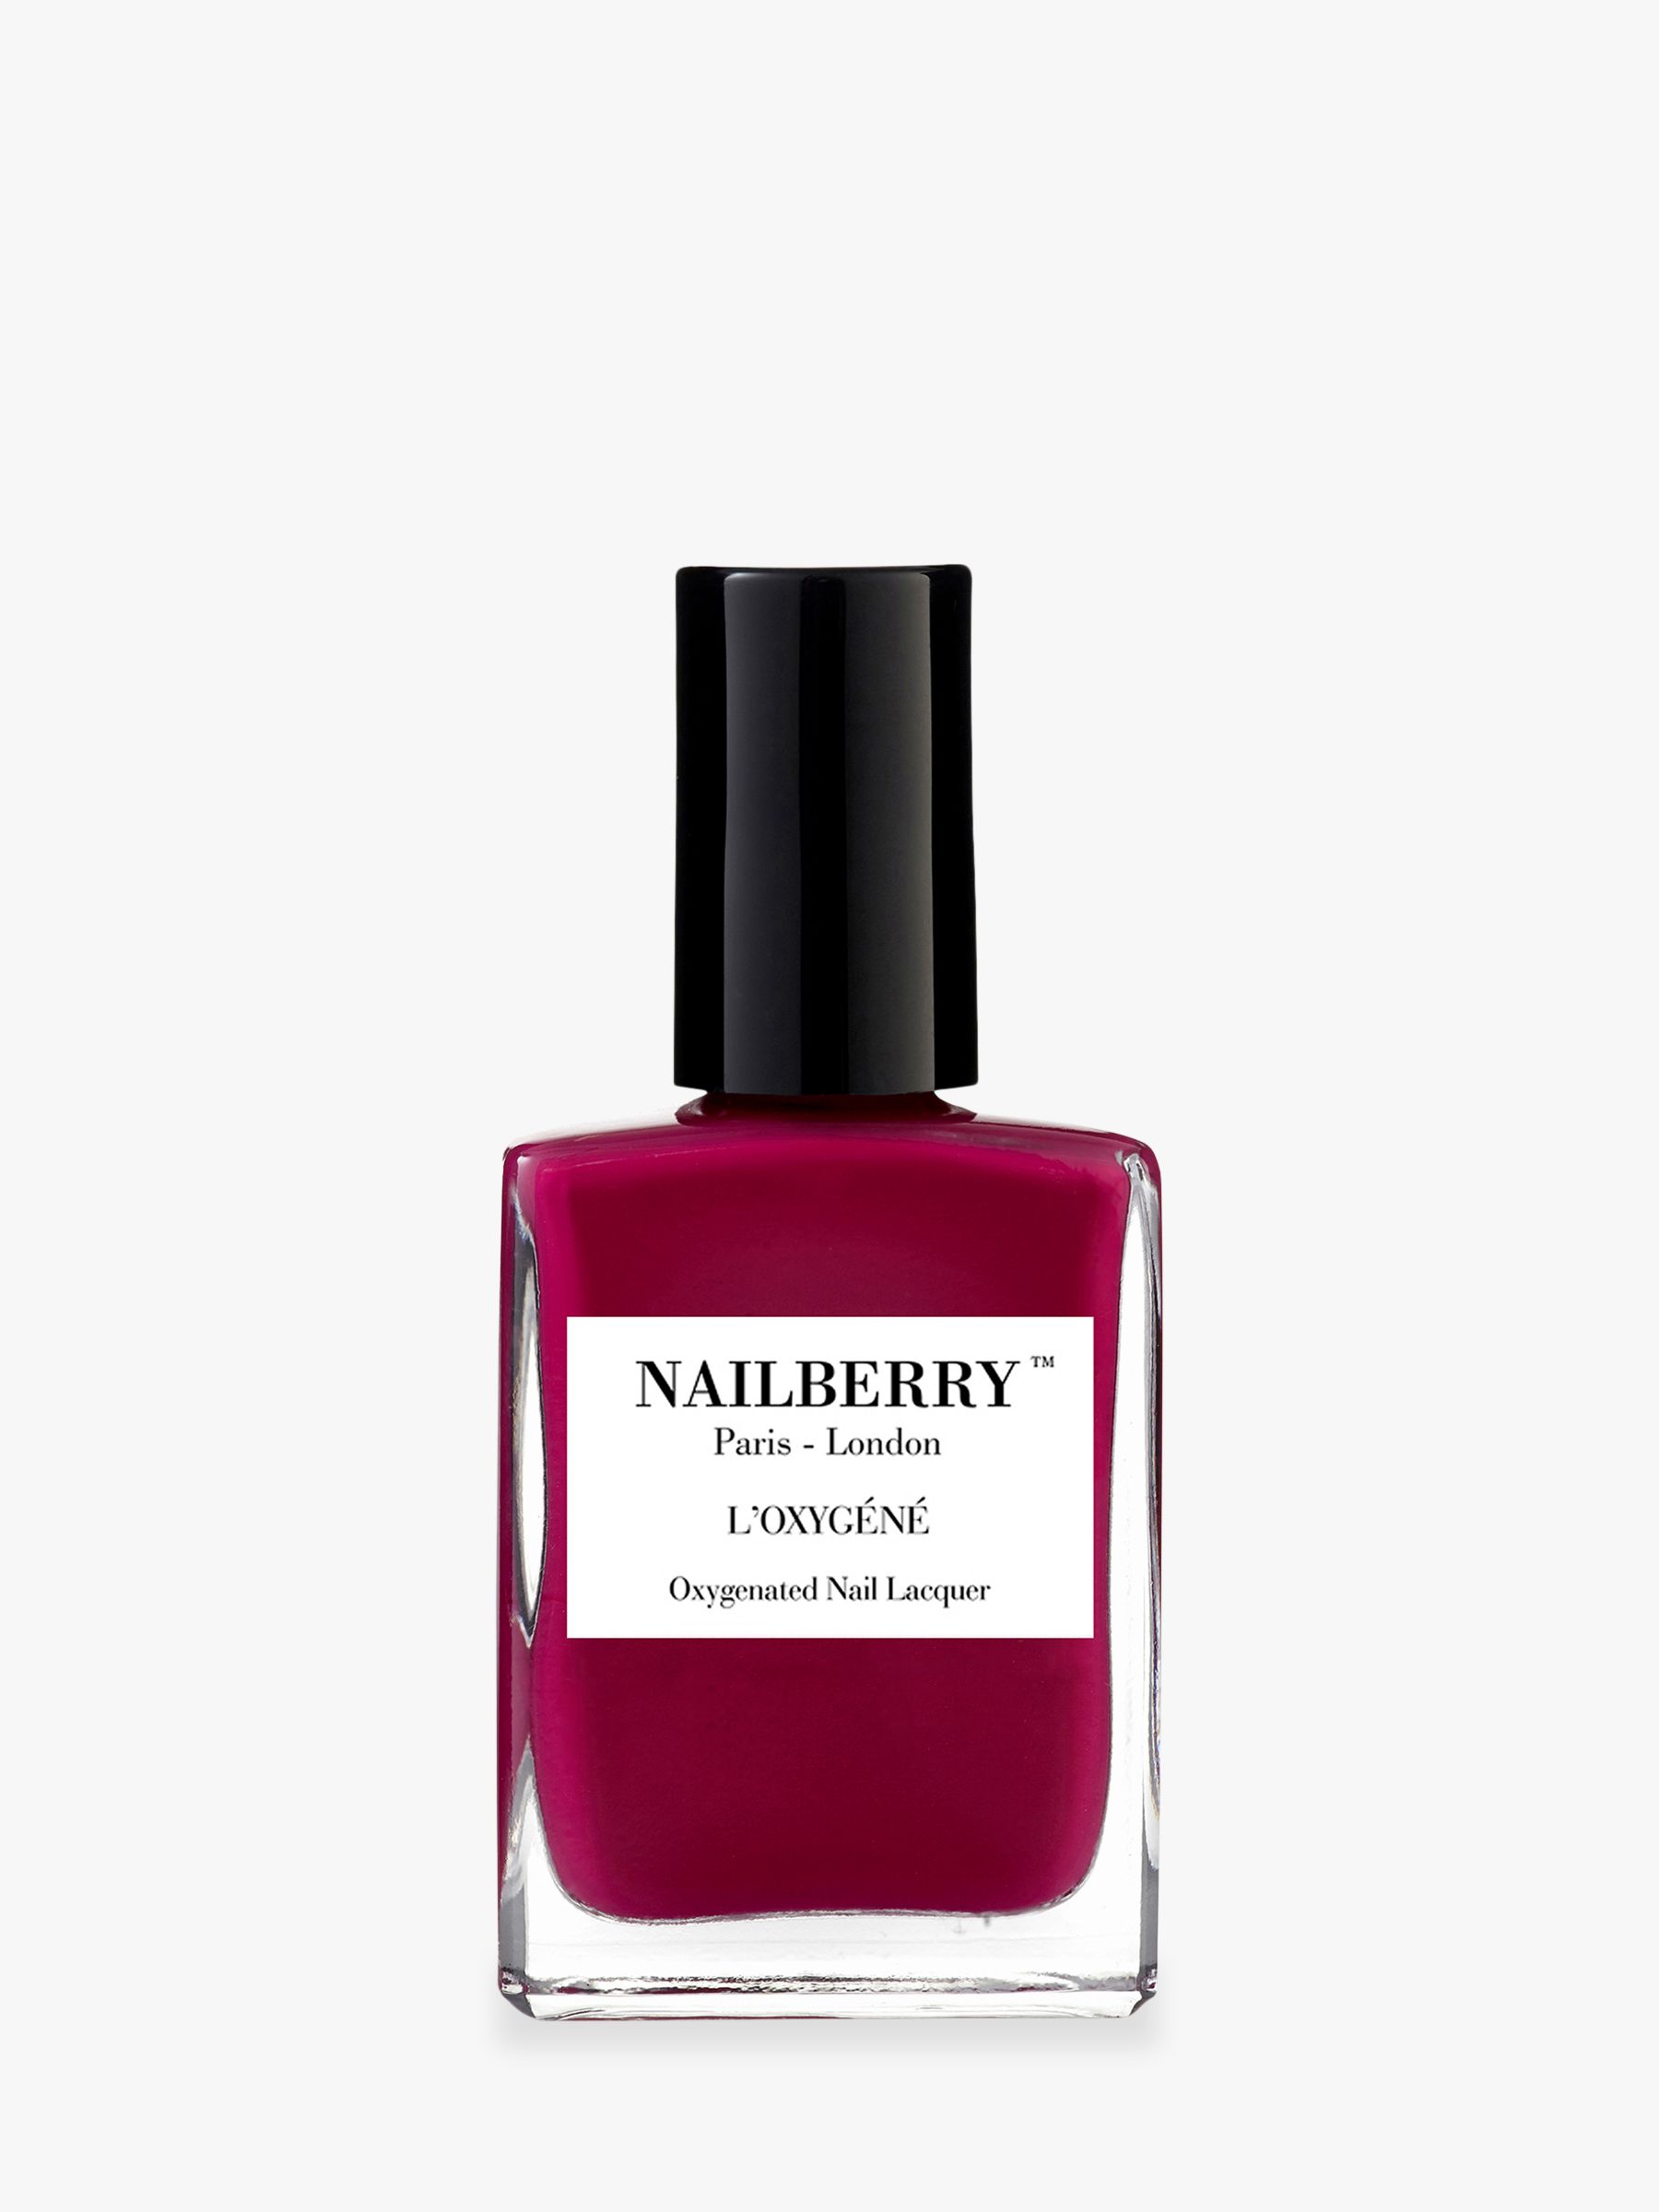 Nailberry L'Oxygéné Oxygenated Nail Lacquer, Raspberry 1